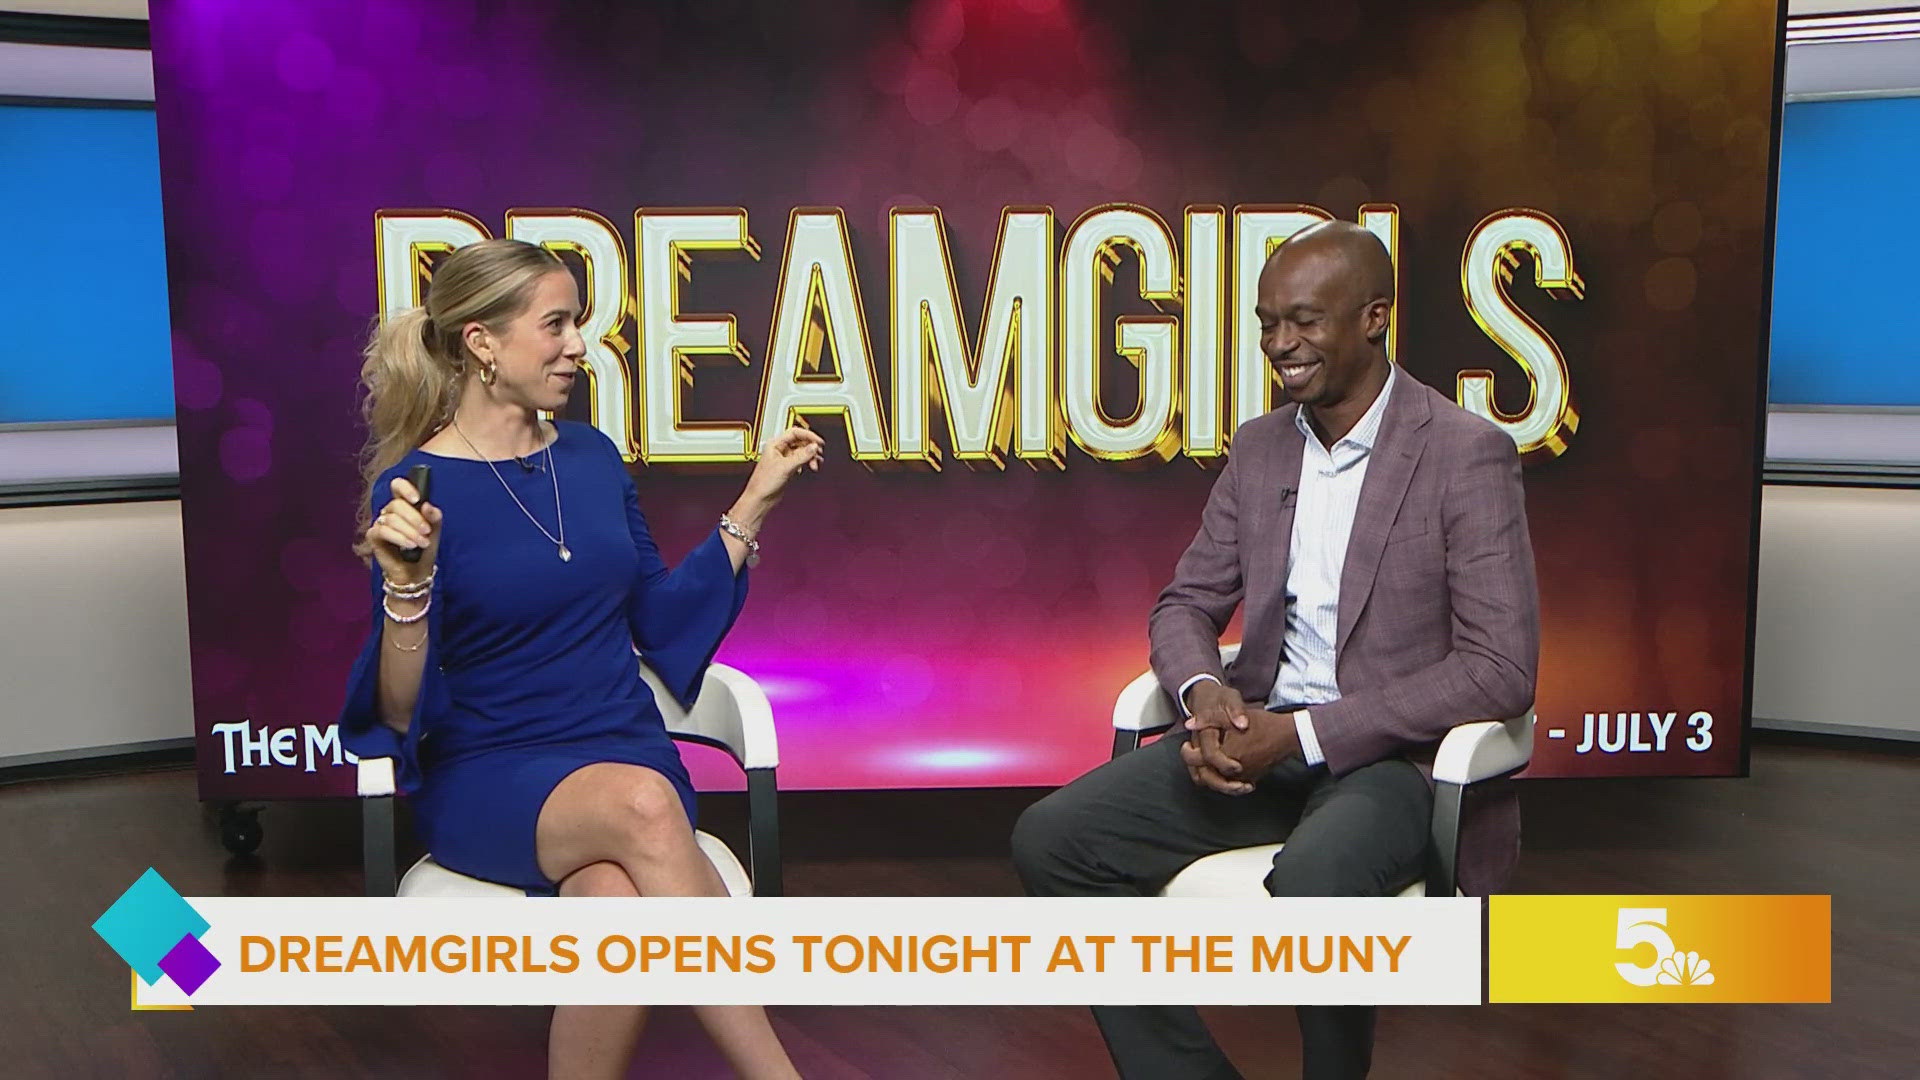 Muny president and CEO Kwofe Coleman joined Mary Caltrider live in the studio to share the excitement about Dreamgirls' opening night.